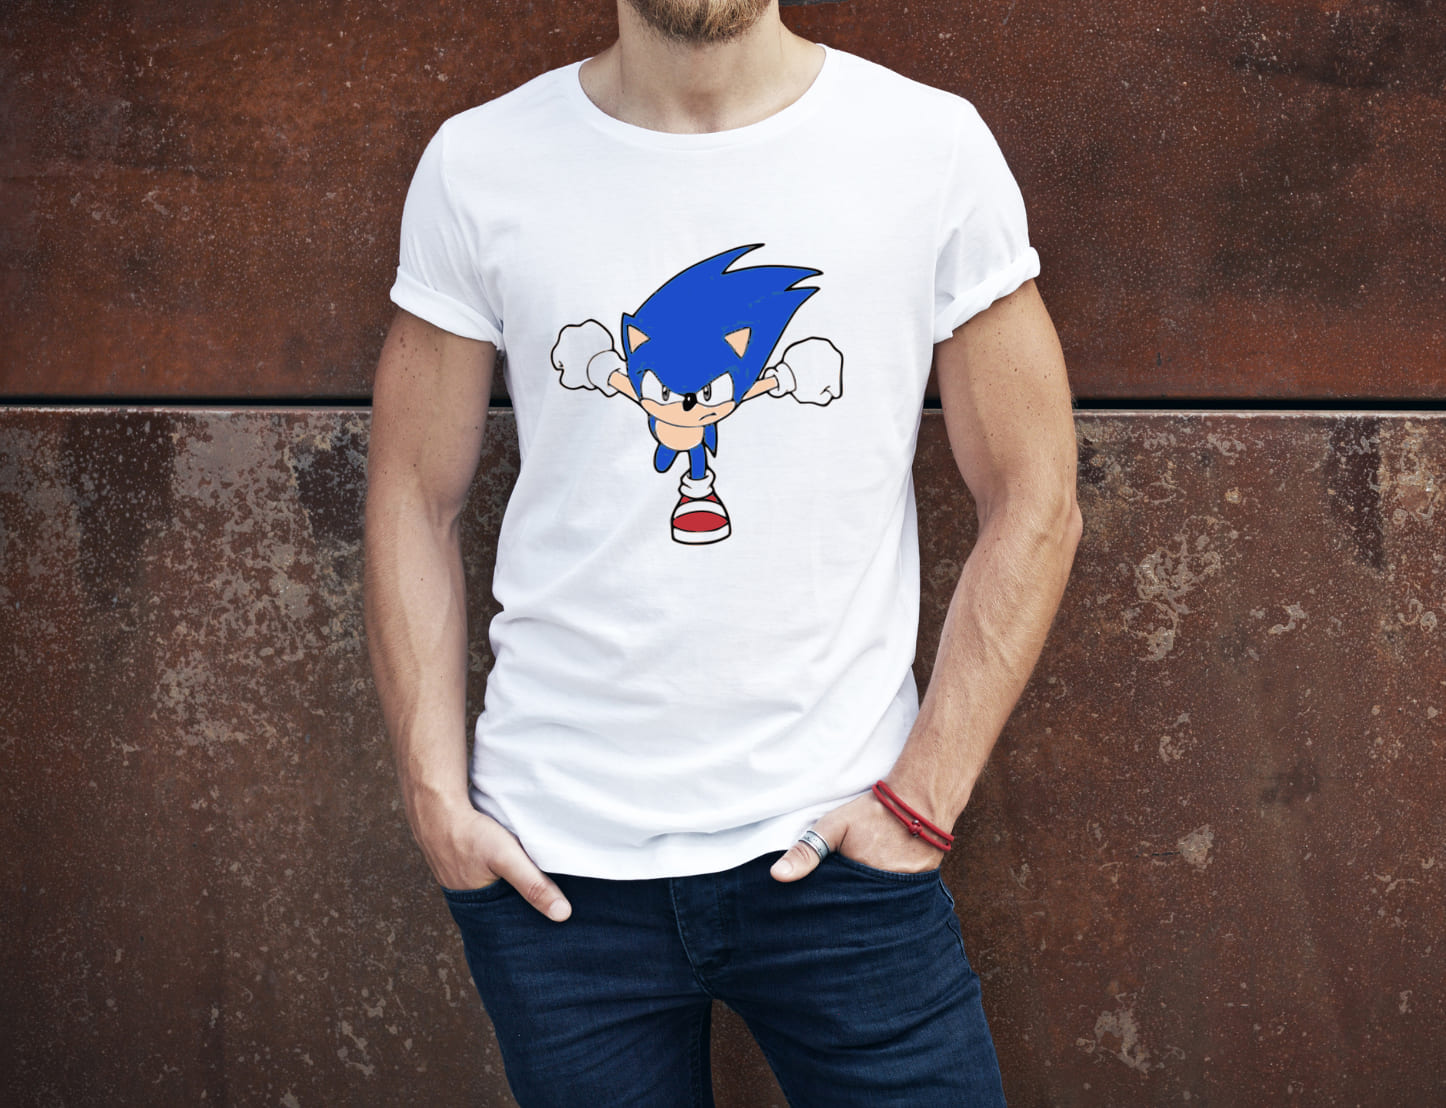 Angry Sonic is ready to fight.